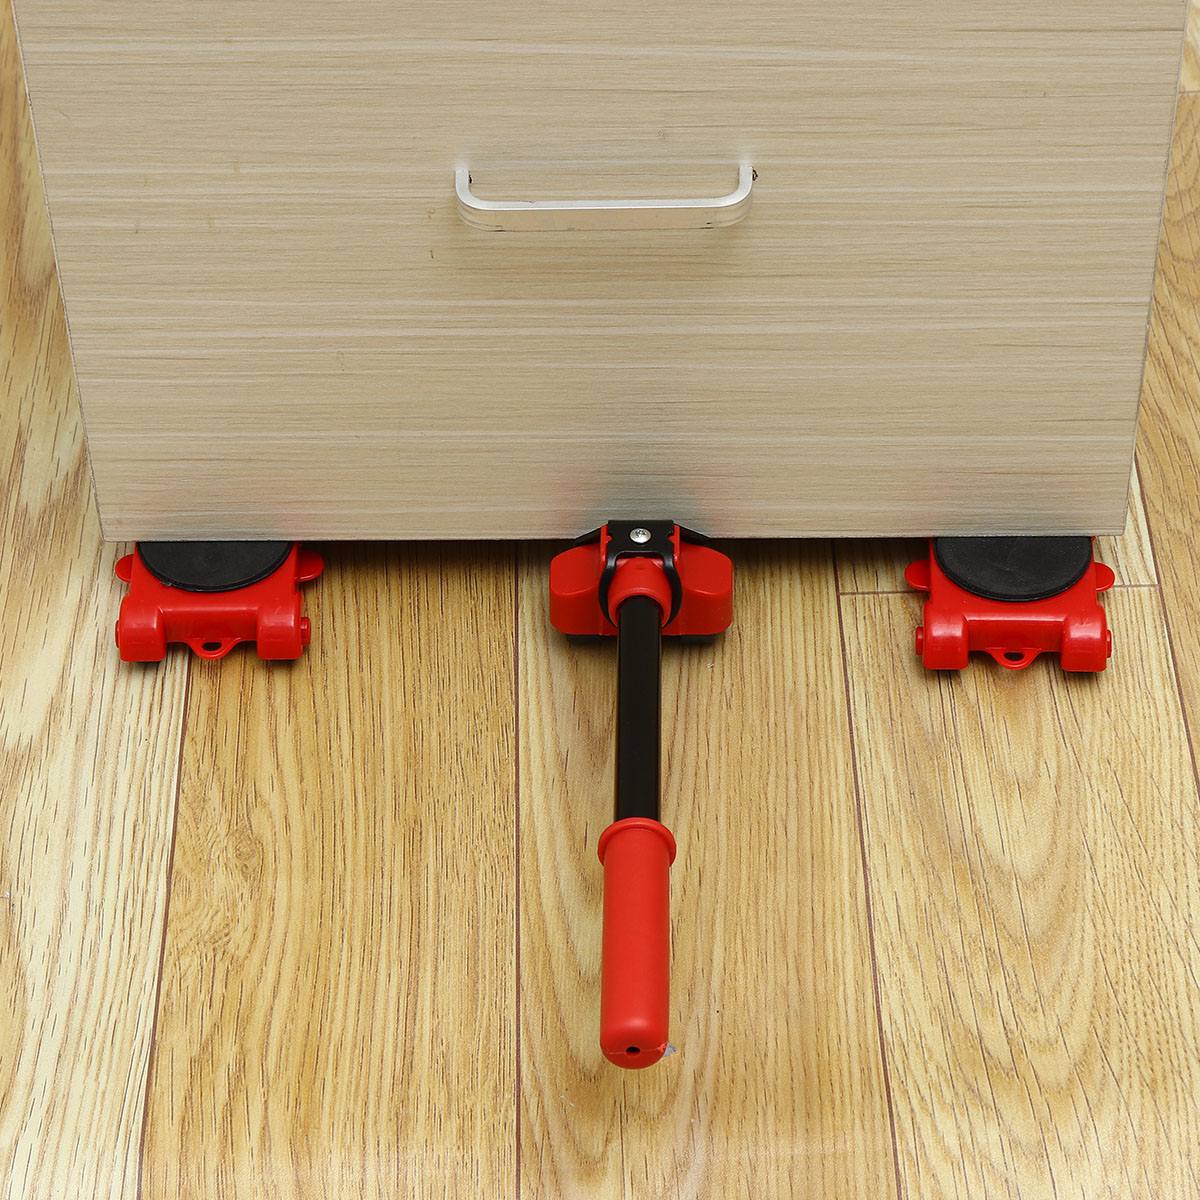 Furniture Moving Transport Tool Set 4 Mover Roller +1 Wheel Bar Heavy Duty